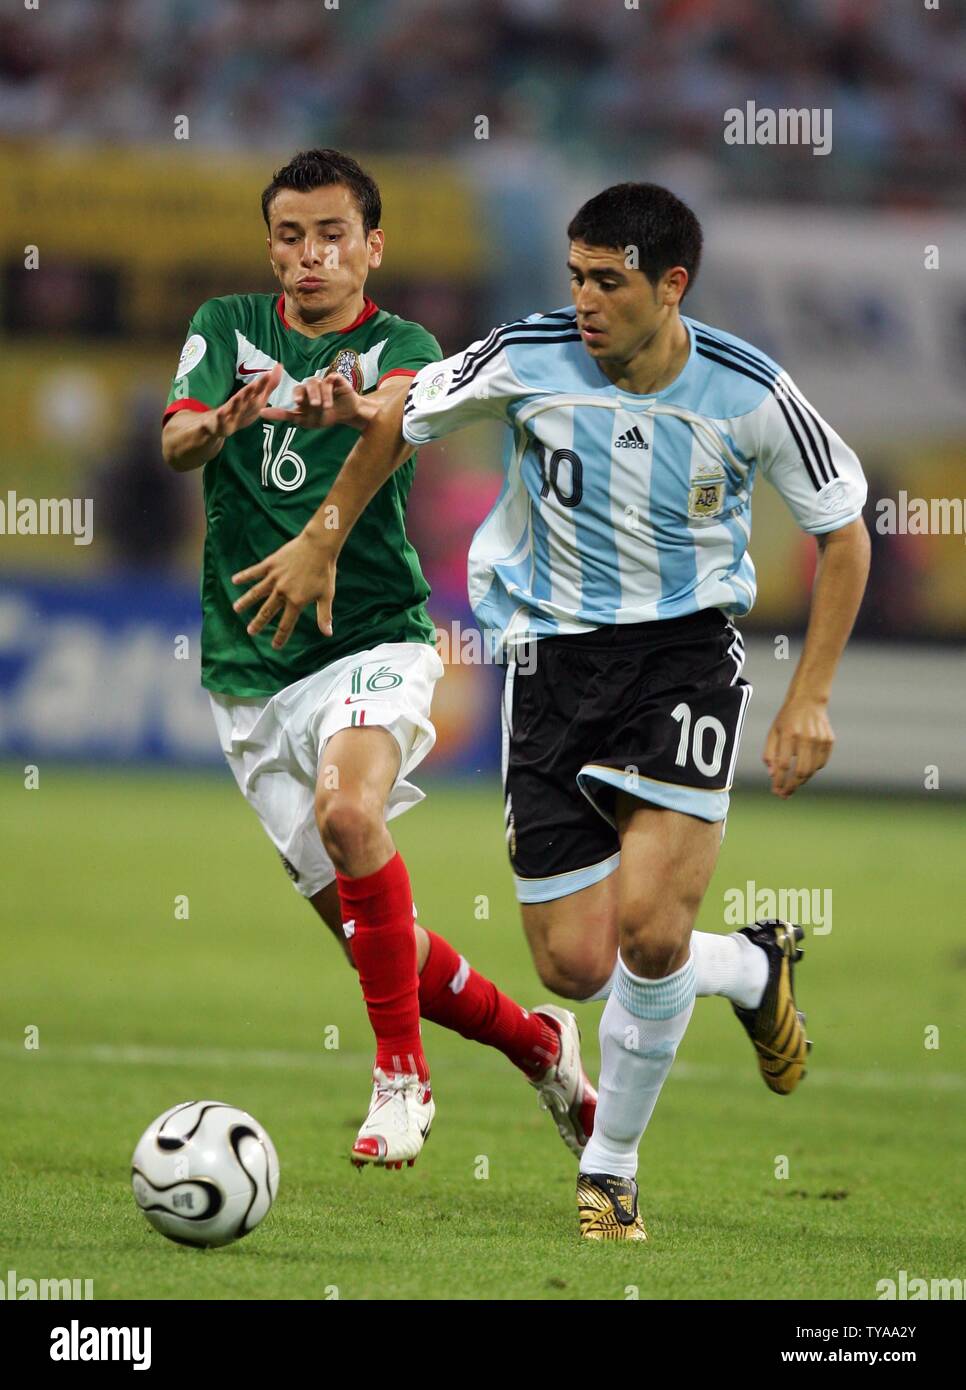 Argentina's Juan Roman Riquelme and Mexico's Andres Guardado during the last 16 knock-out stage of the FIFA World Cup Germany 2006 at the Zentralstadion in Leipzig, Germany, on June 24, 2006. Argentina needed extra-time and a wonder strike from Maxi Rodriguez to give them a 2-1 victory over Mexico and a place in the quarter-finals.  (UPI Photo/Christian Brunskill) Stock Photo